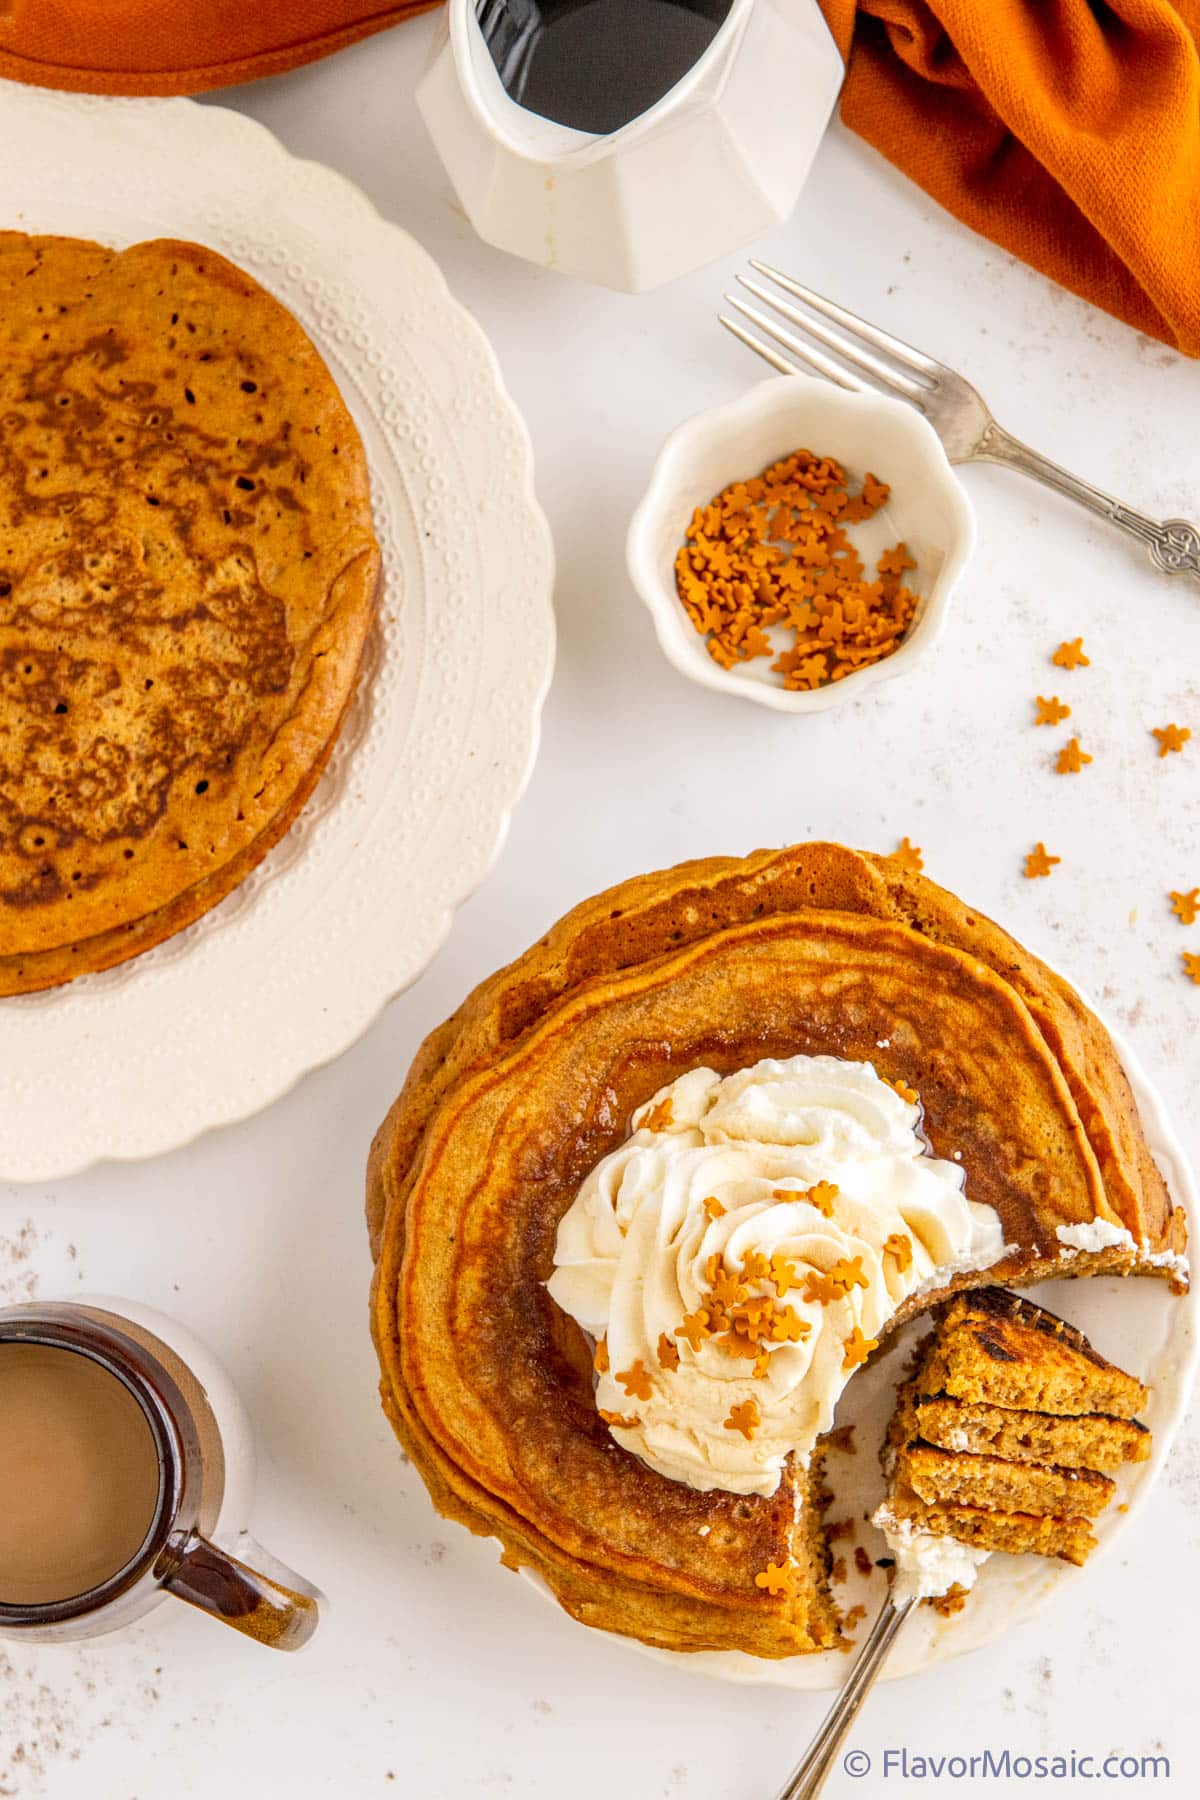 An overhead photo of a white plate with a stack of gingerbread pancakes with whipped cream with tiny gingerbread man edible decorations, with a fork with a bite of 4 pancakes with whipped cream on the fork sitting on the plate. In the upper left is a partial view of a white plate with another stack of pancakes, In the upper right is a rust orange napkin with a small white pitcher with maple syrup, a fork, a small white container of tiny gingerbread man decorations, all on a white granite background.